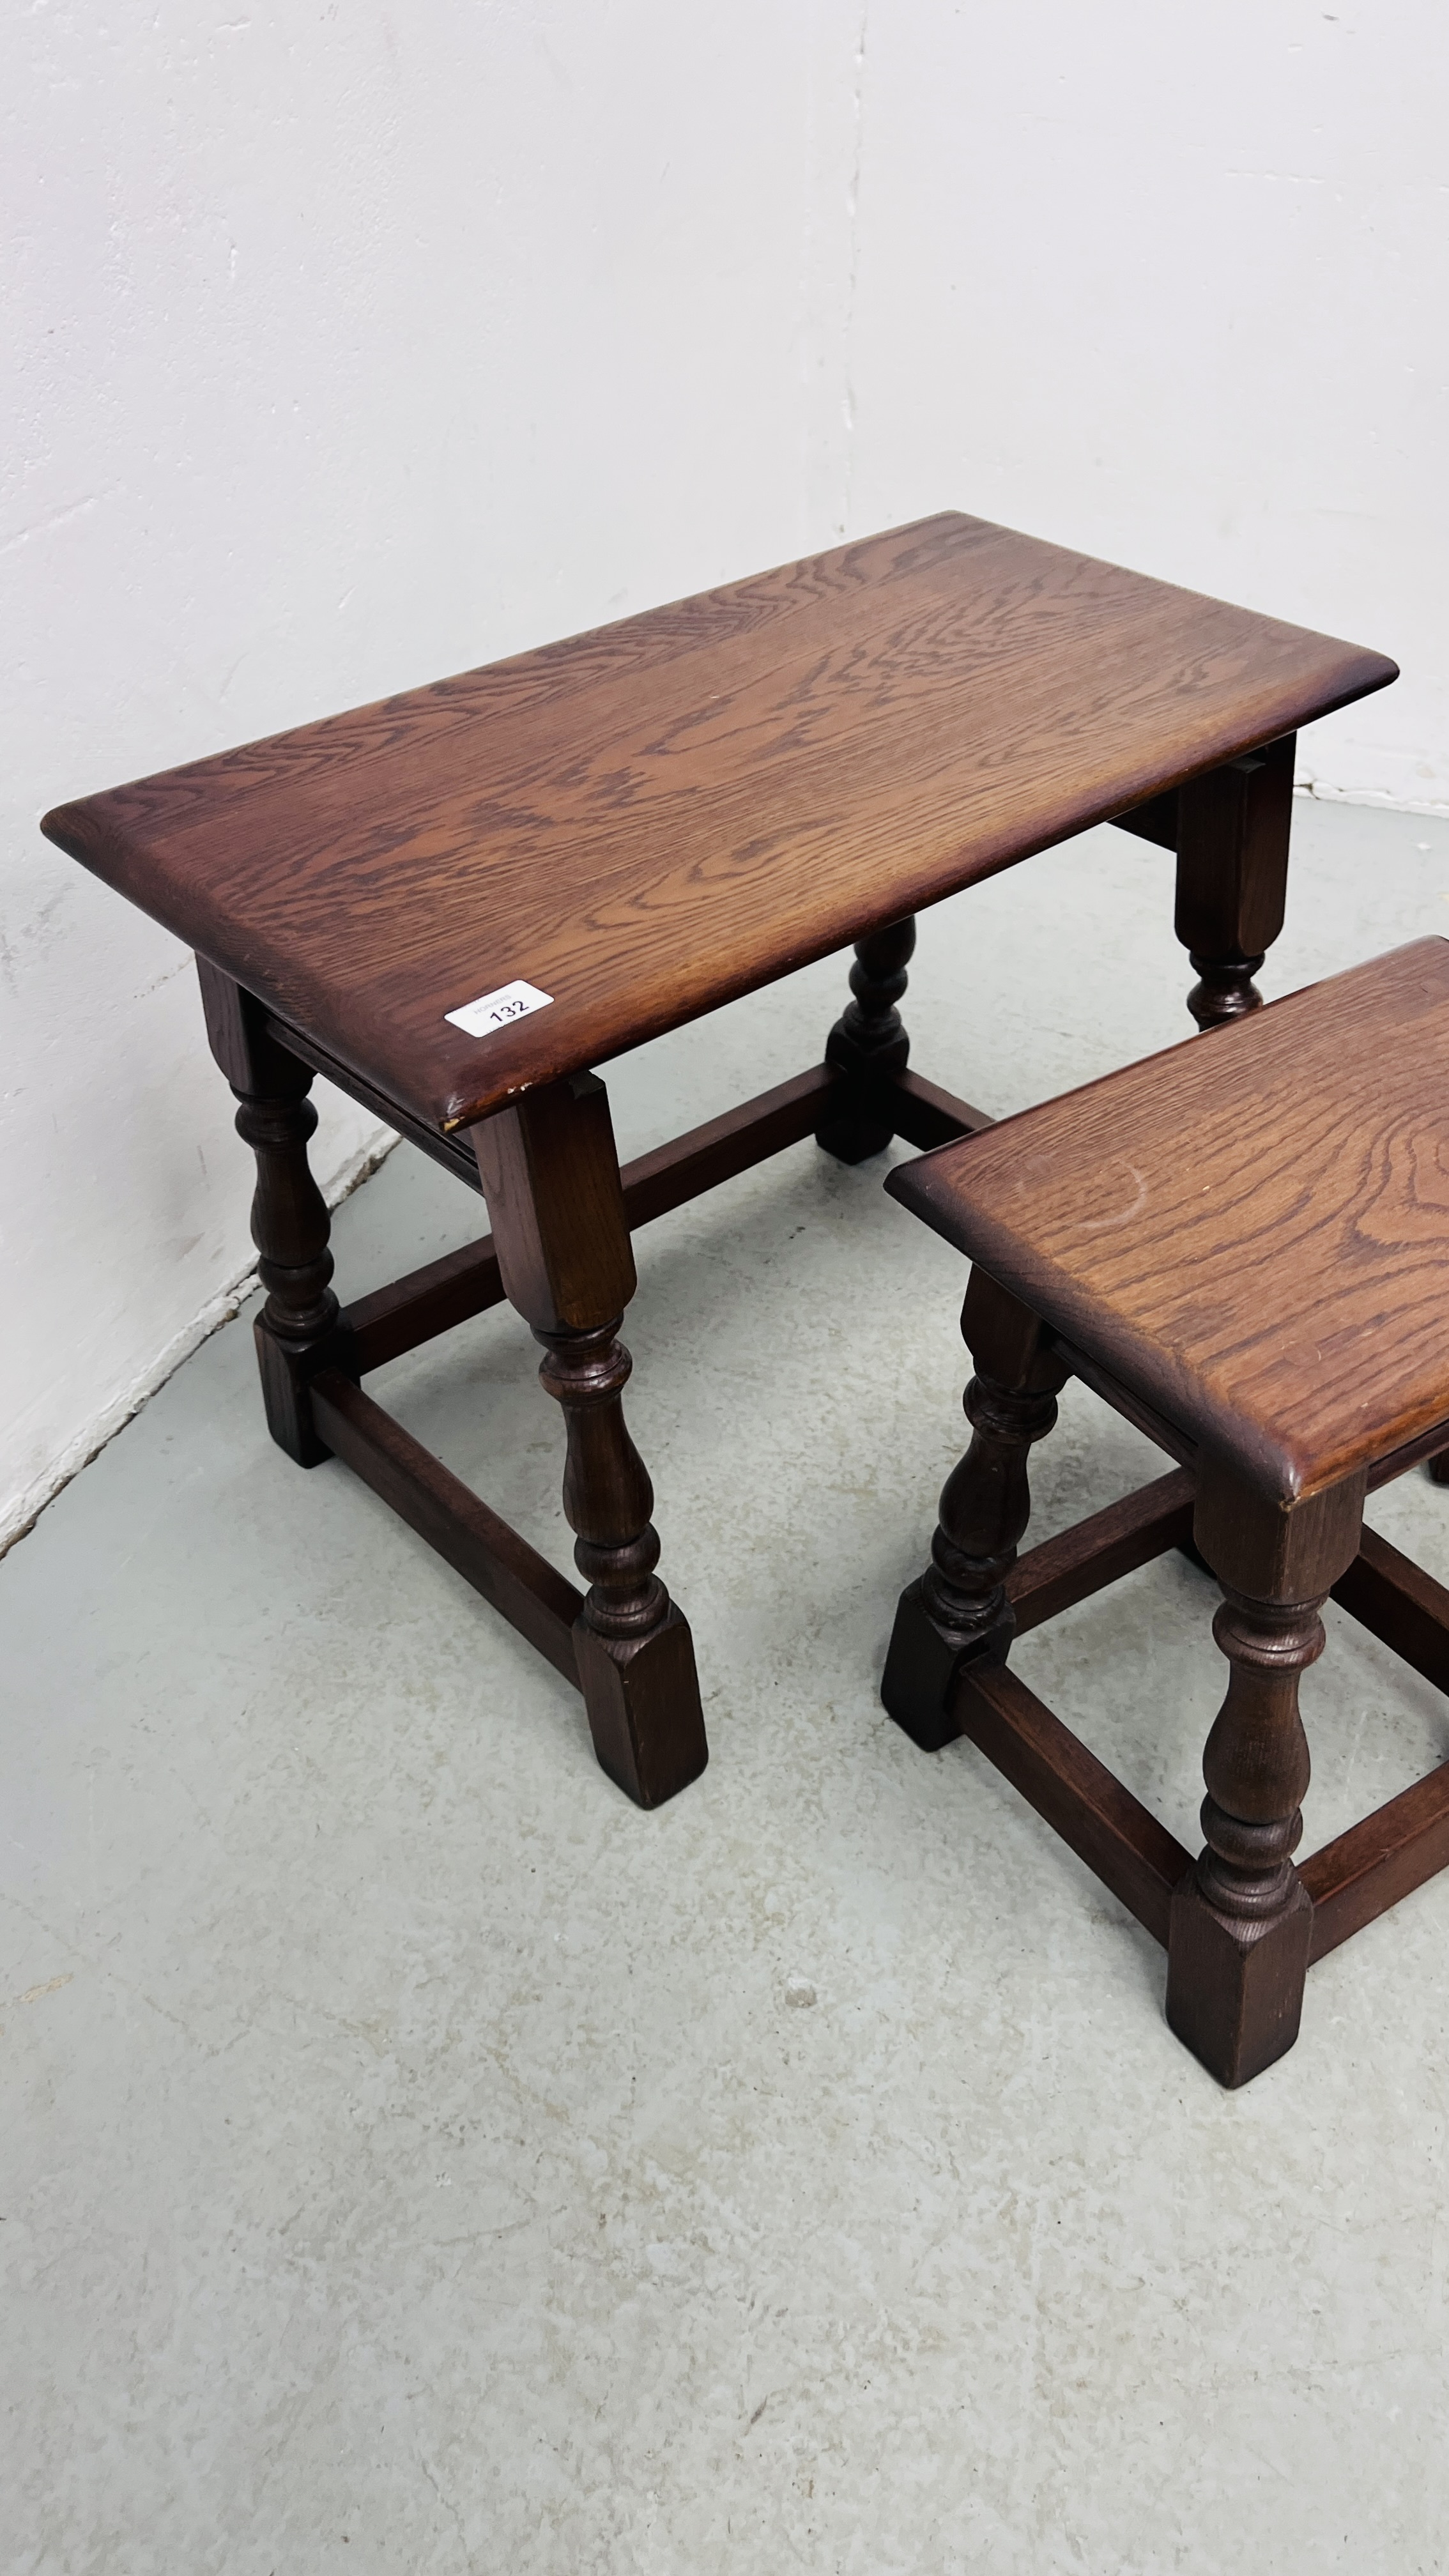 A NEST OF THREE REPRODUCTION GOOD QUALITY OAK TABLES (THE LARGEST 60CM. X 32CM. - Image 4 of 8